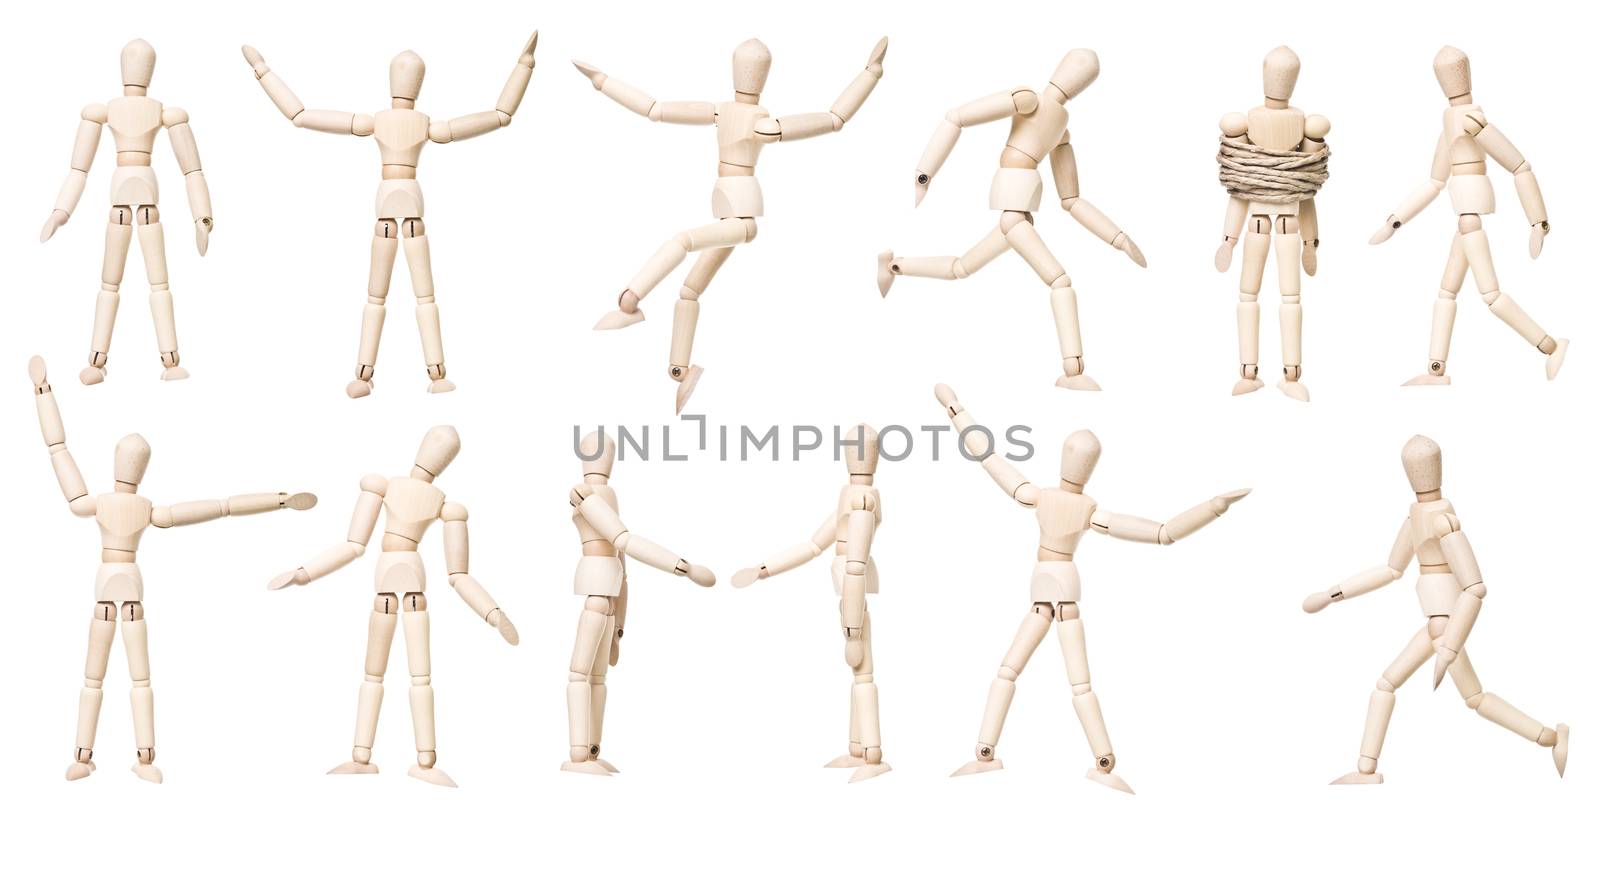 Large group of Mannequin Dolls with different expression by gemenacom